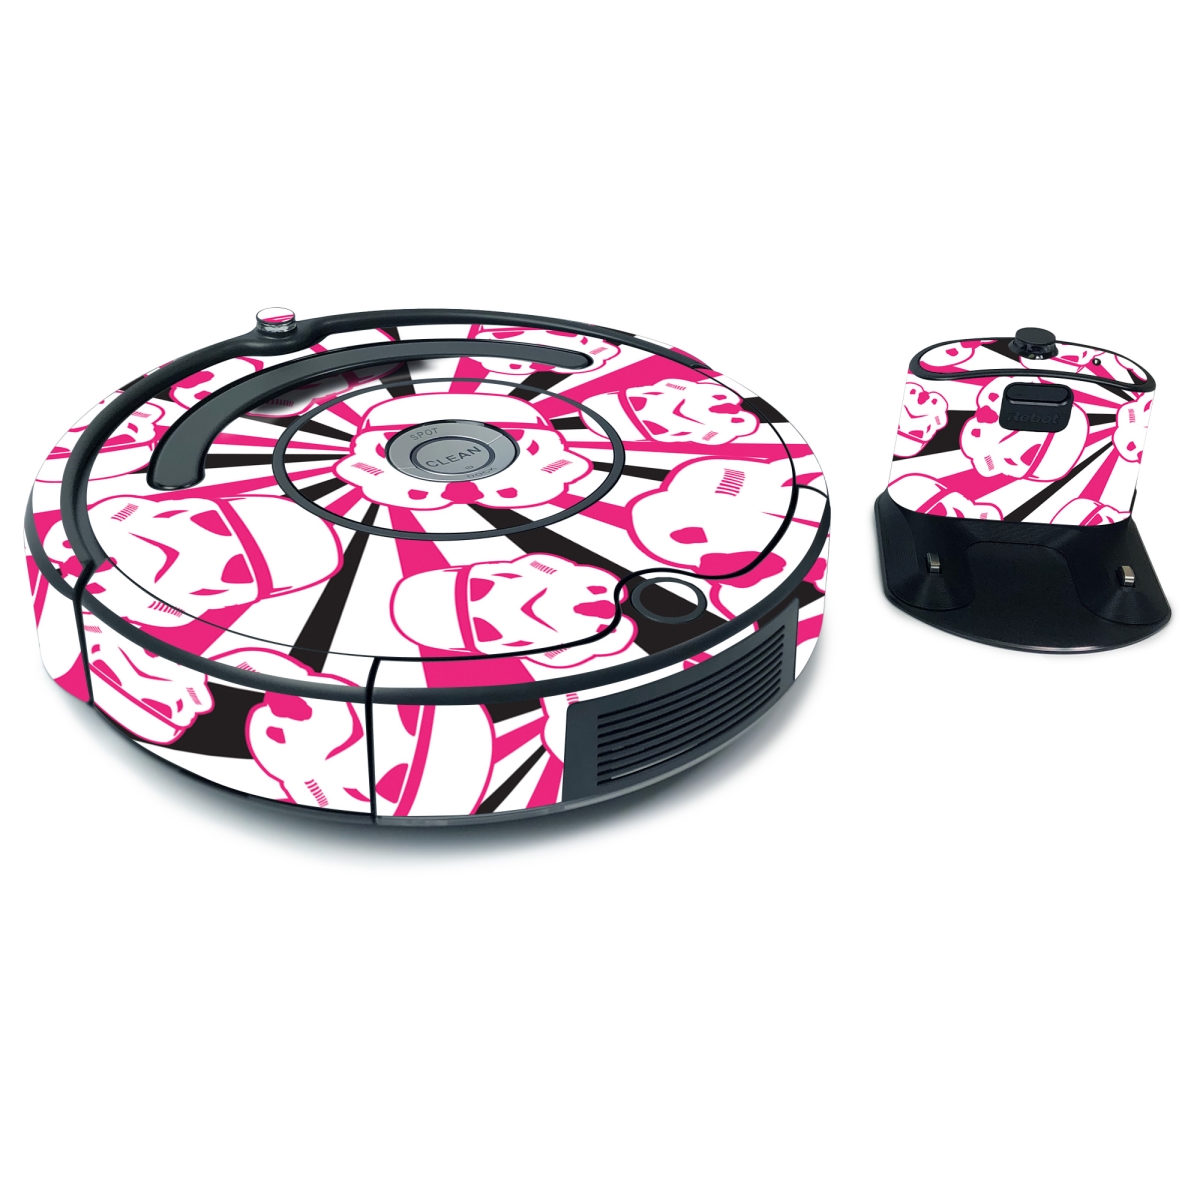 Picture of MightySkins IRRO675-Pink Trooper Storm Skin for iRobot Roomba 675 Max Coverage - Pink Trooper Storm